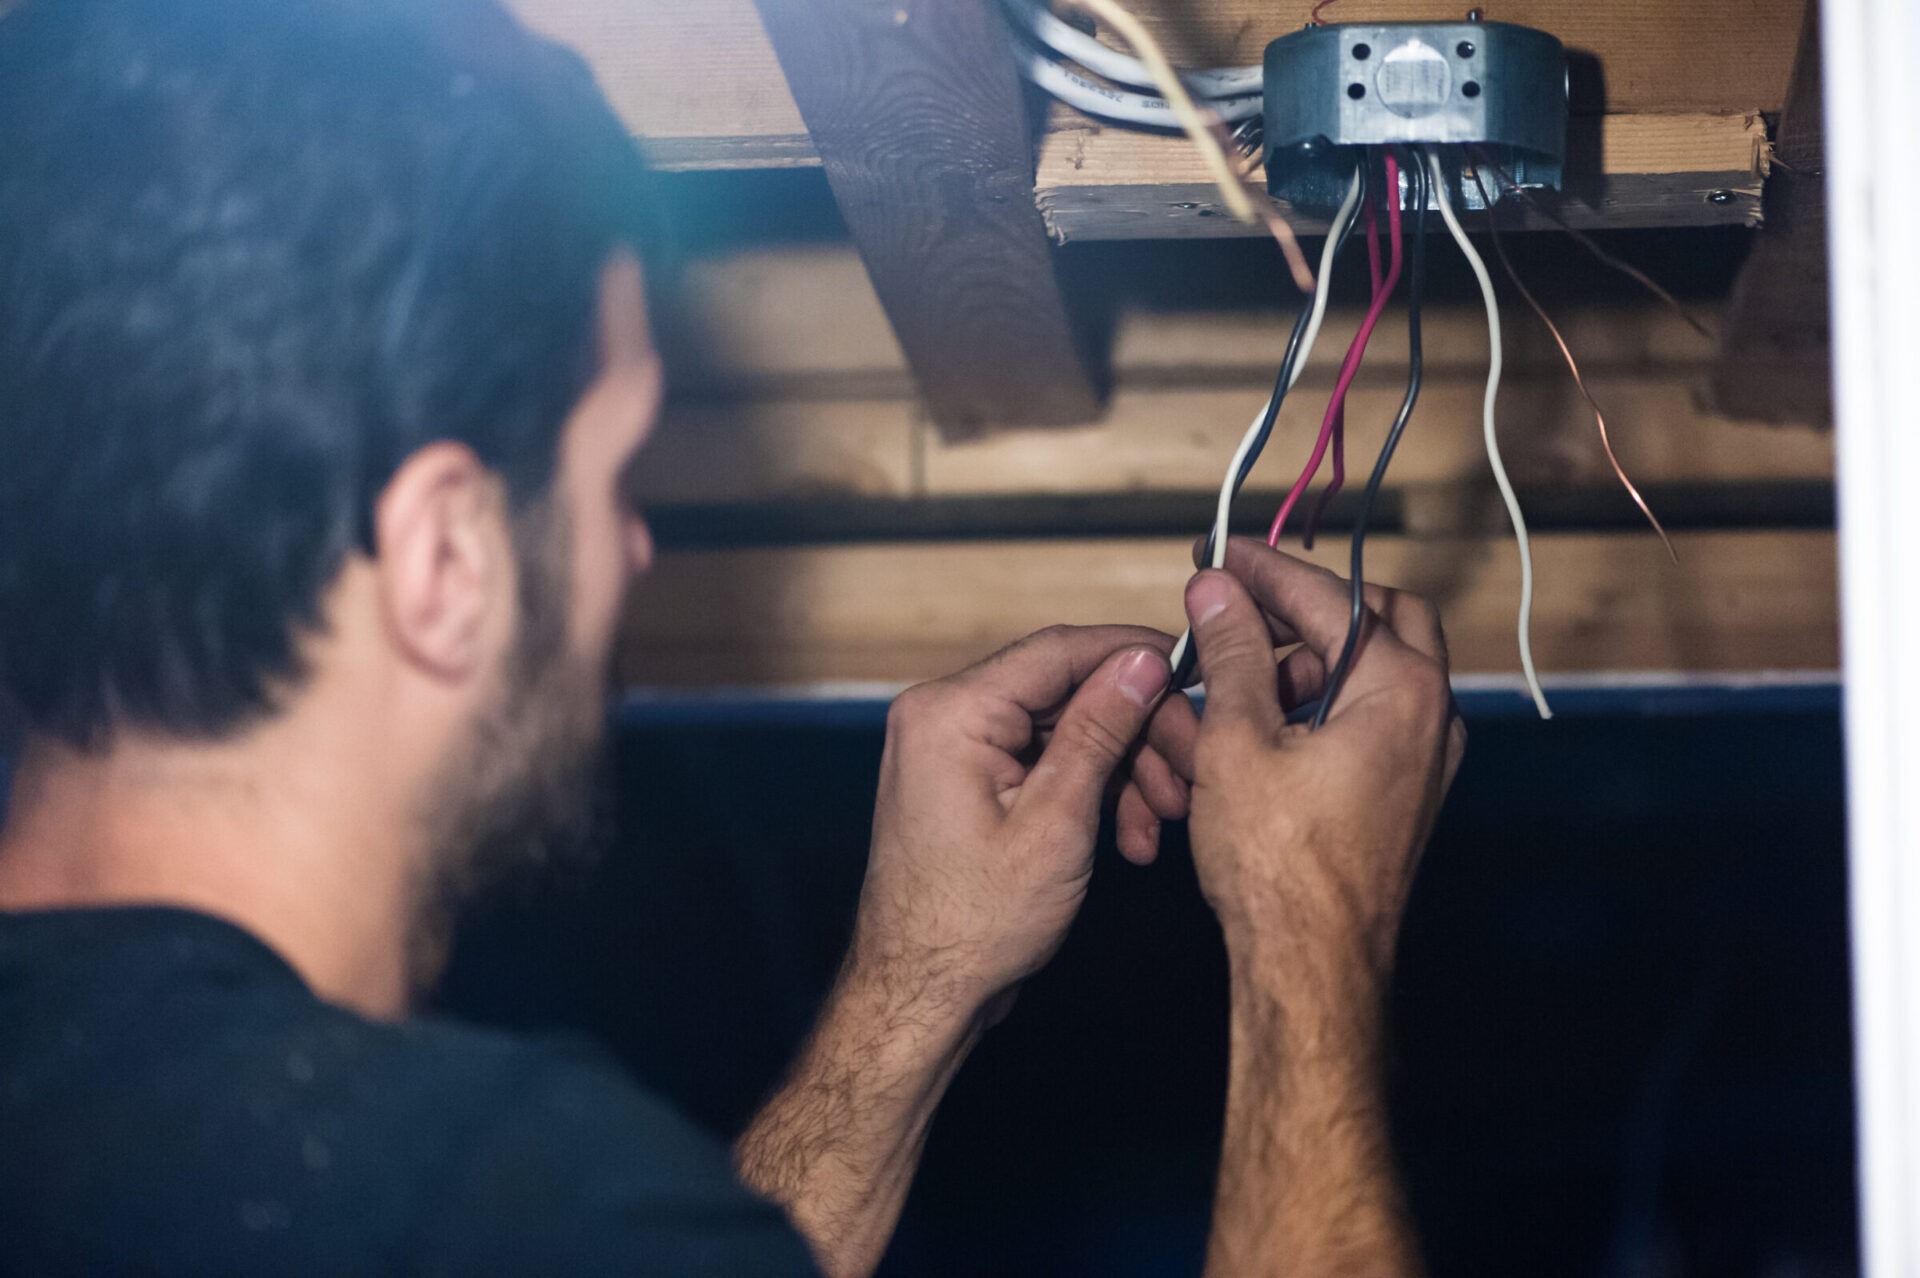 A person is installing or repairing electrical wiring, focused on connecting wires in a junction box in a dimly lit, indoor setting.